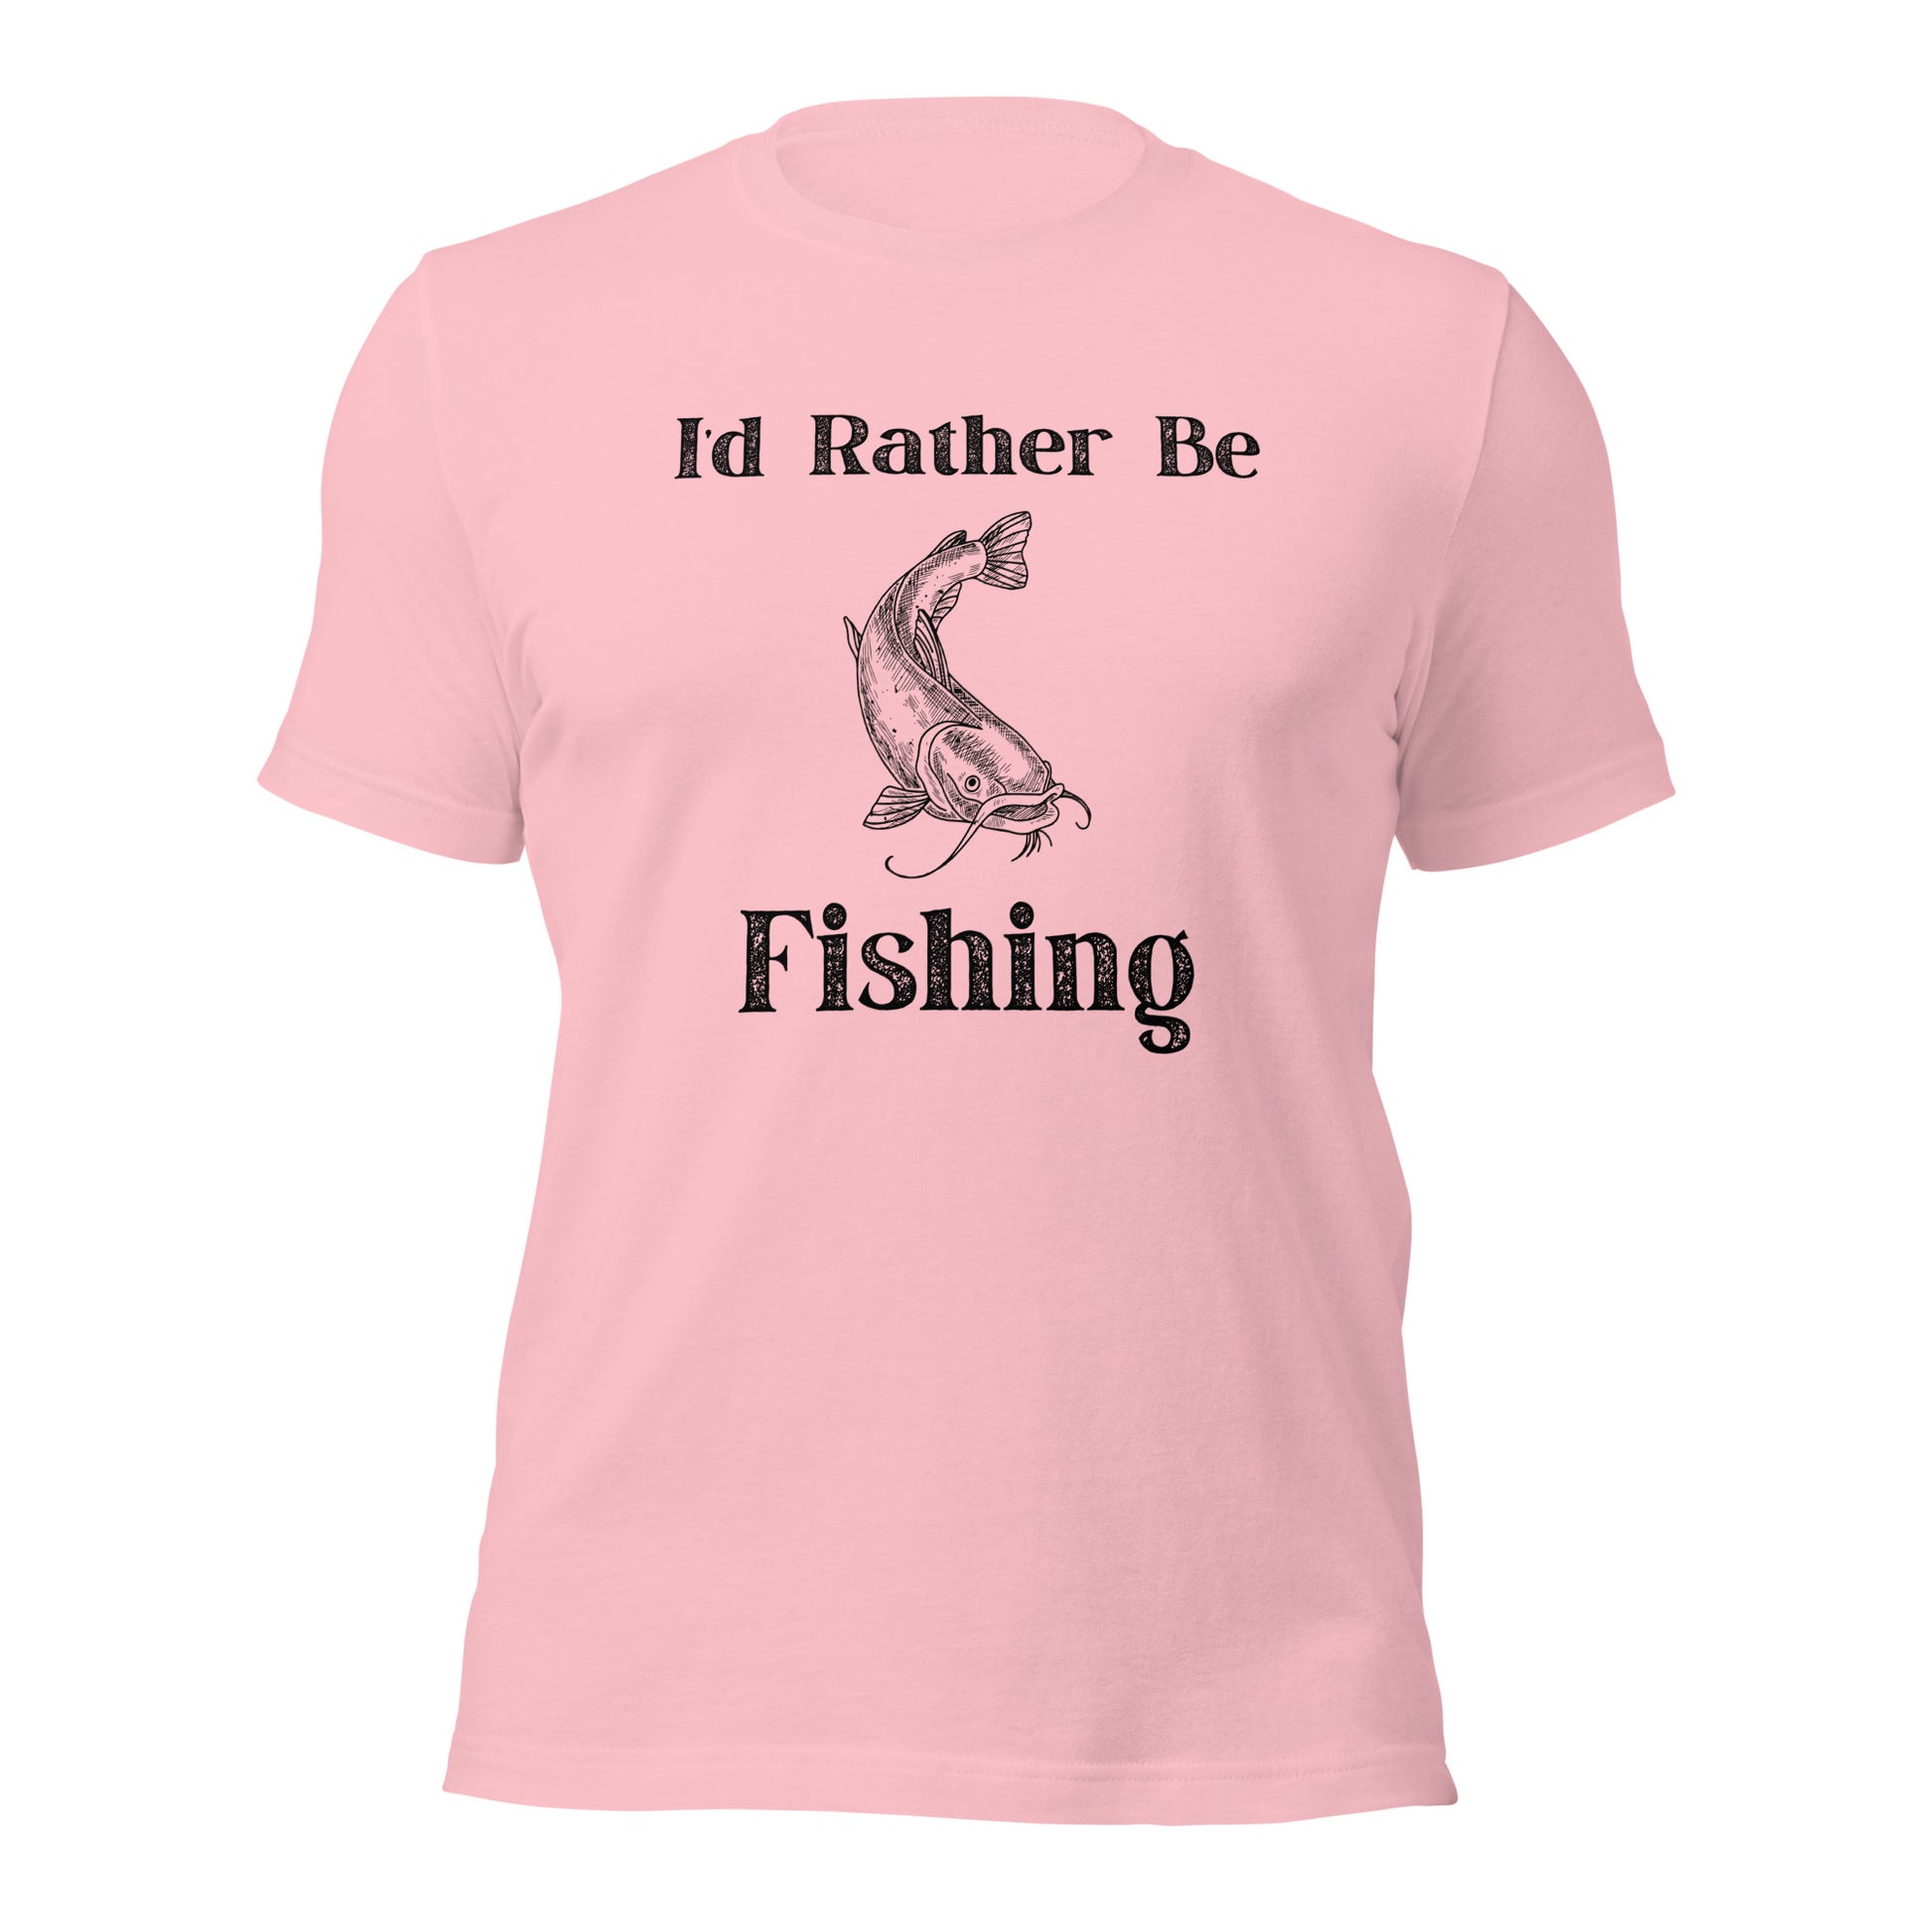 Unique gift idea: "I'd Rather Be Fishing" shirt for anglers.